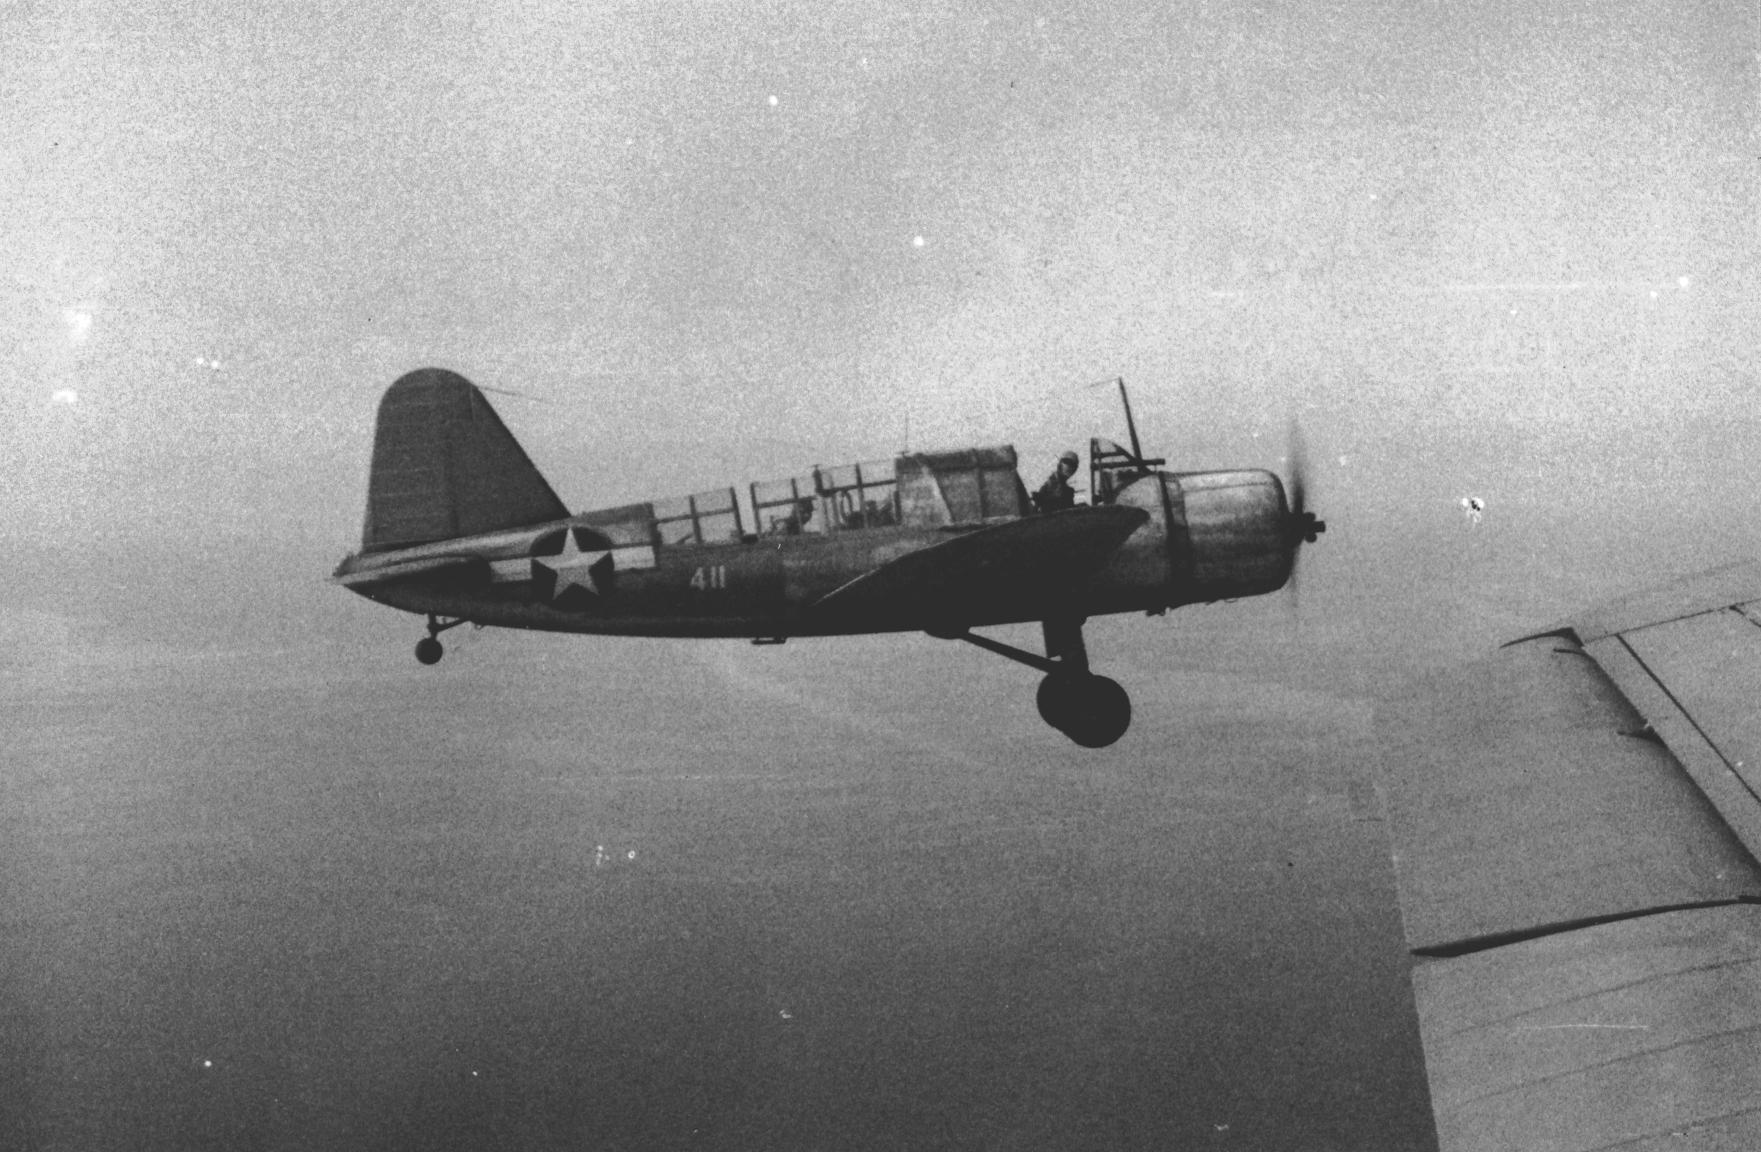 US Navy Scouting Squadron 44 (VS-44) OS2U Kingfisher aircraft, piloted by Ens. J. Clay Staples, in flight over southern Caribbean Sea, circa Jul 1943